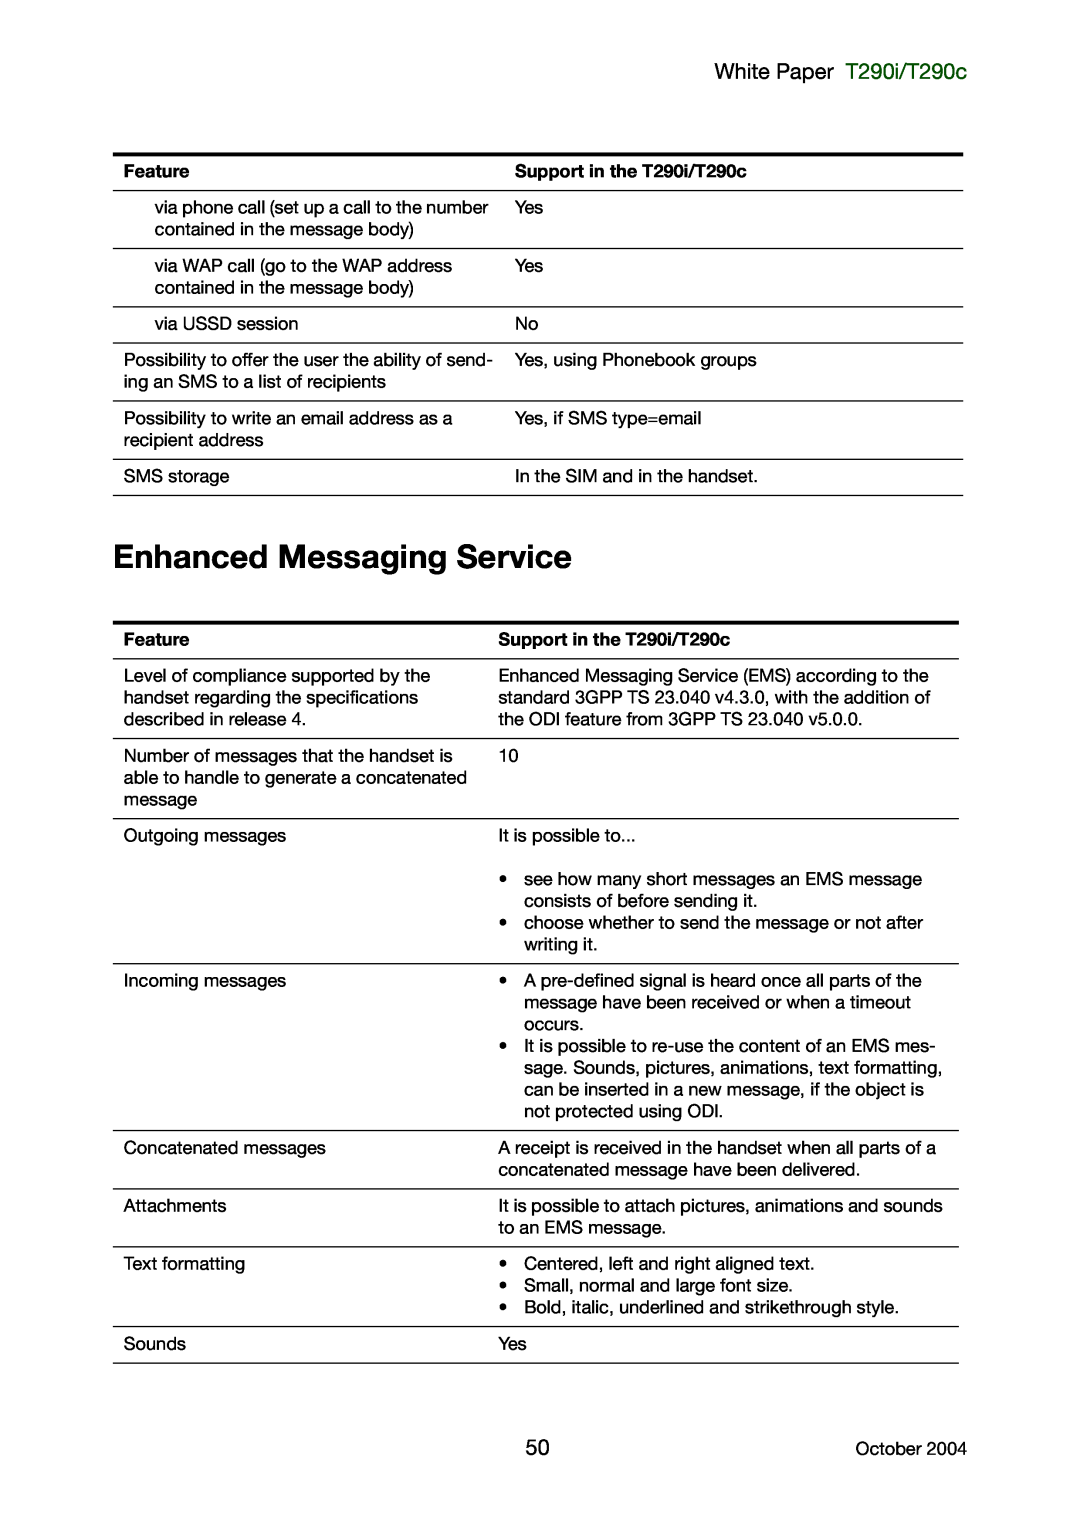 Sony Ericsson manual Enhanced Messaging Service, White Paper T290i/T290c 